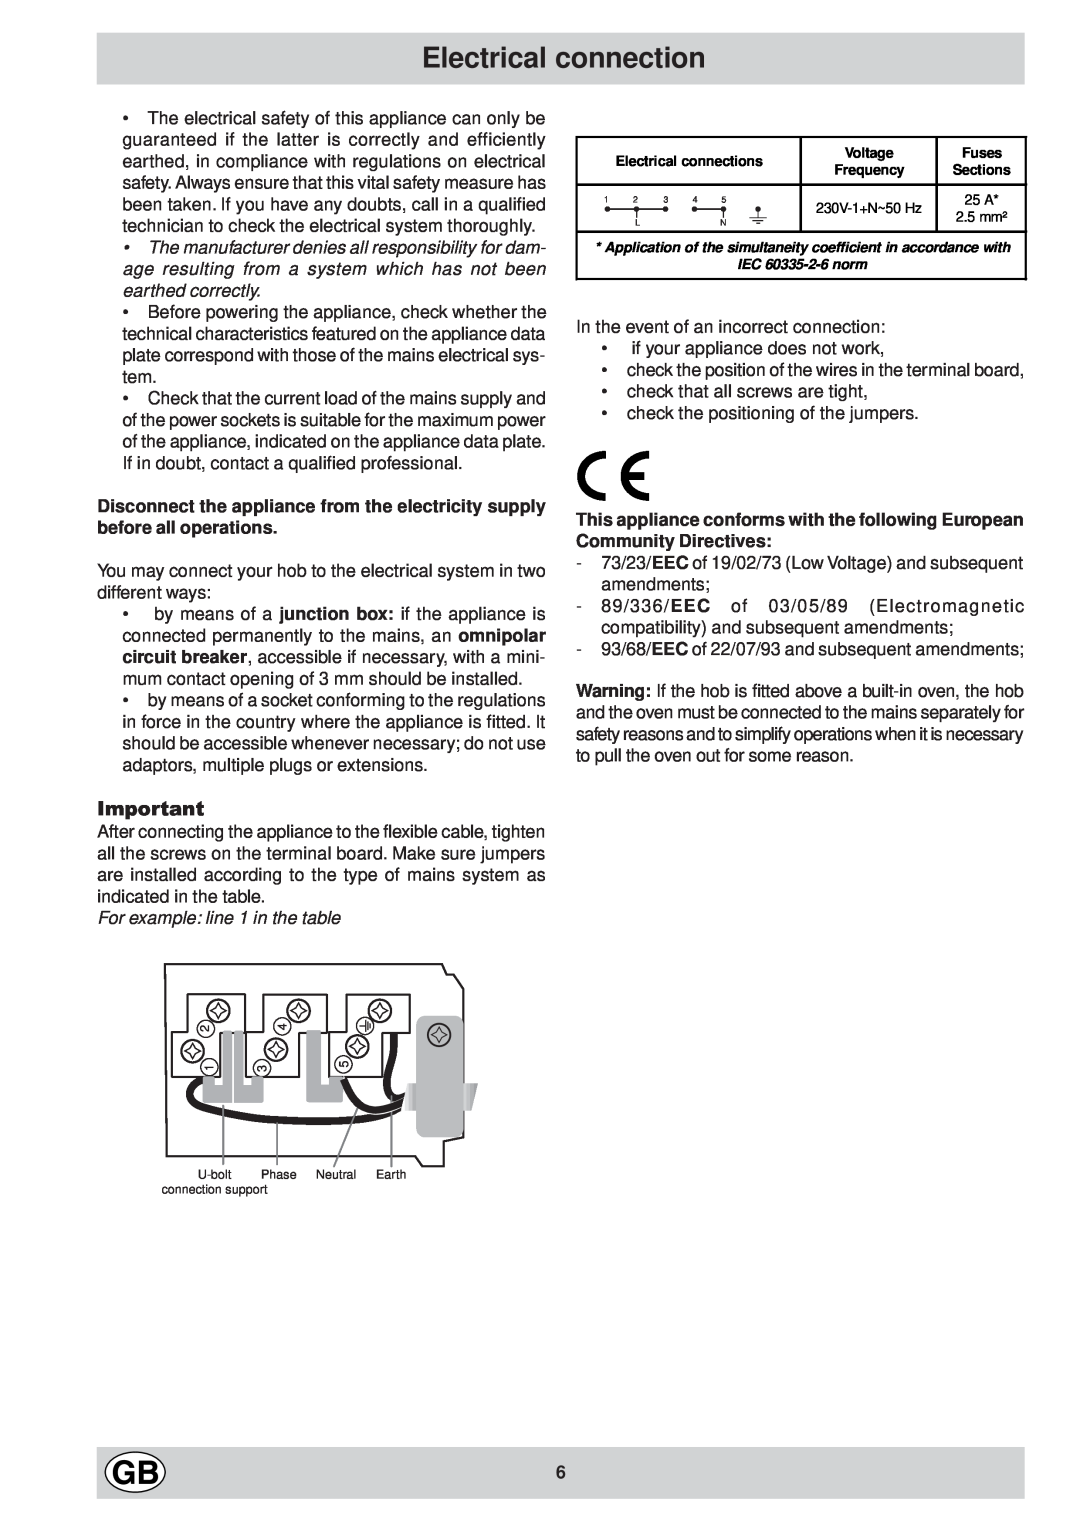 Hotpoint EC6011 - EC6014 manual Electrical connection, For example line 1 in the table 